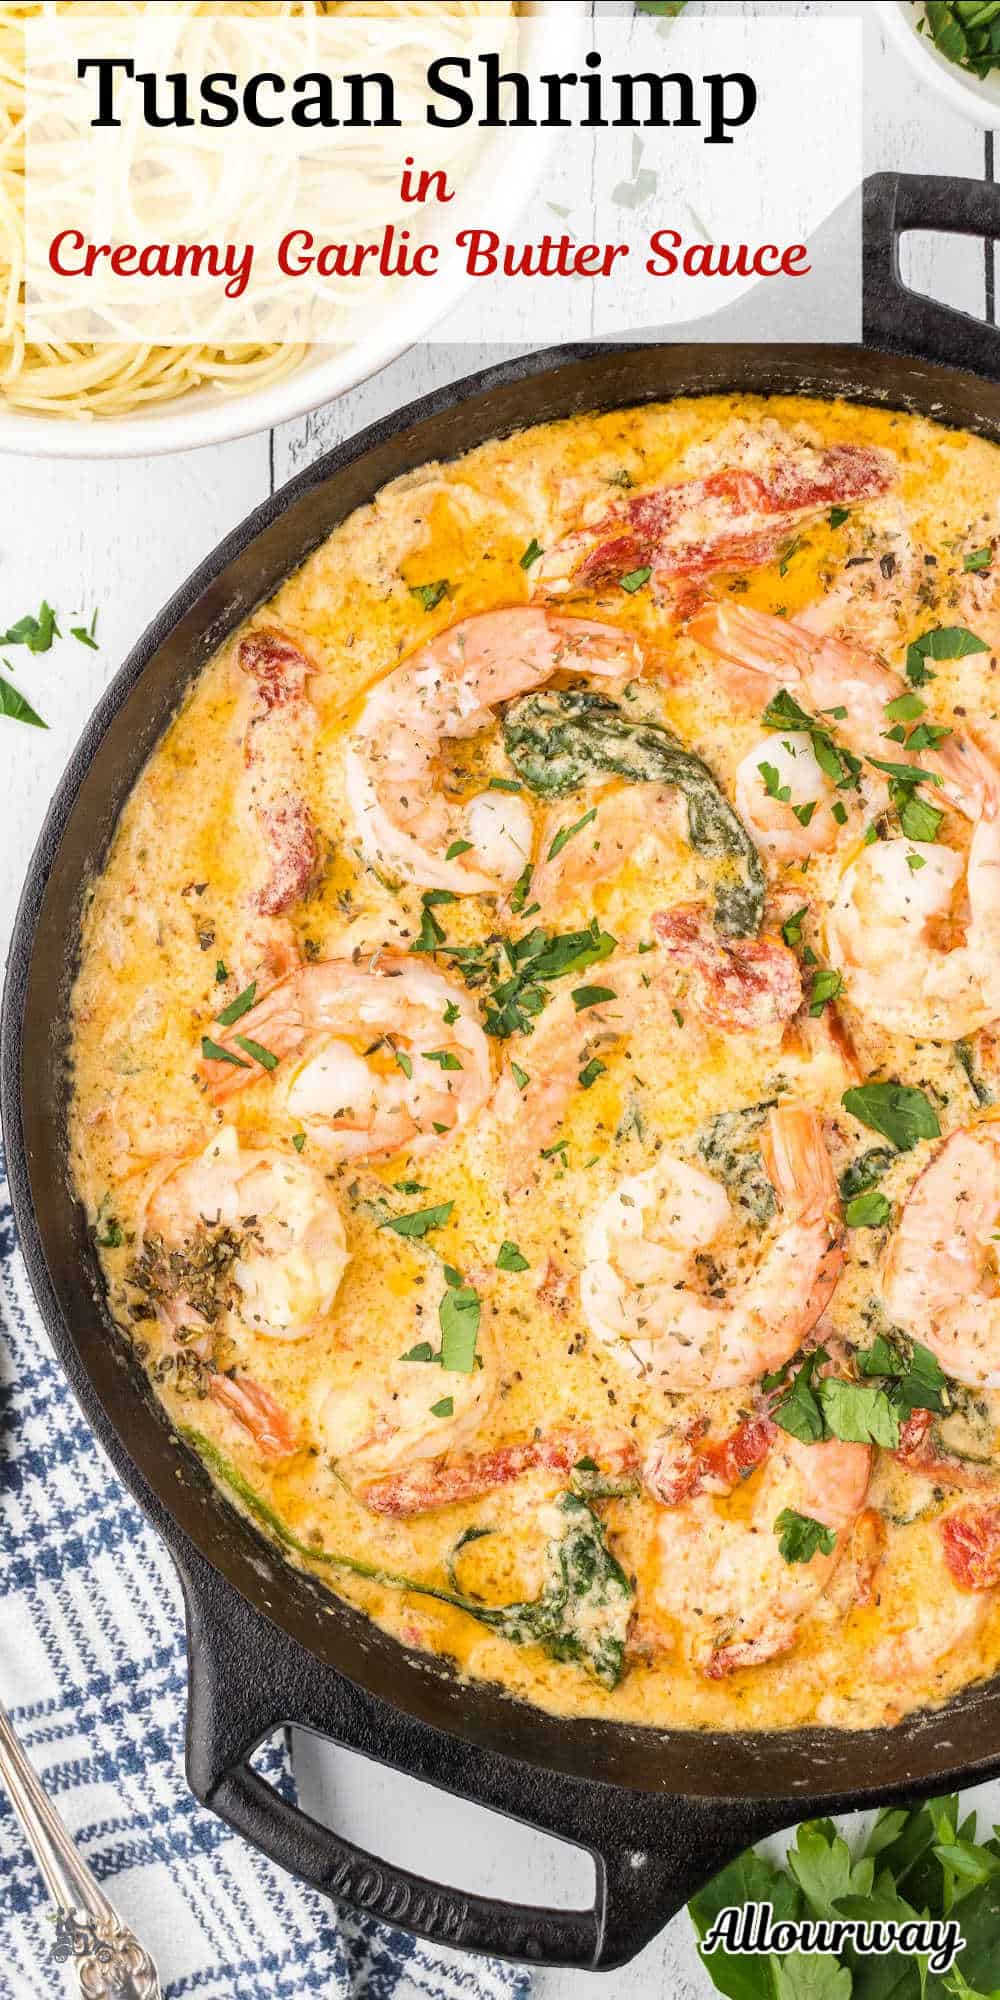 Mouthwatering Tuscan Shrimp in Creamy Garlic Sauce is a recipe for the seafood lover who wants to be transported to the heart of Tuscany. Every blissful bite of this Tuscan shrimp dream is a delightful combination of creamy garlic butter sauce, spinach, sun-dried tomatoes, and perfectly cooked spaghetti.